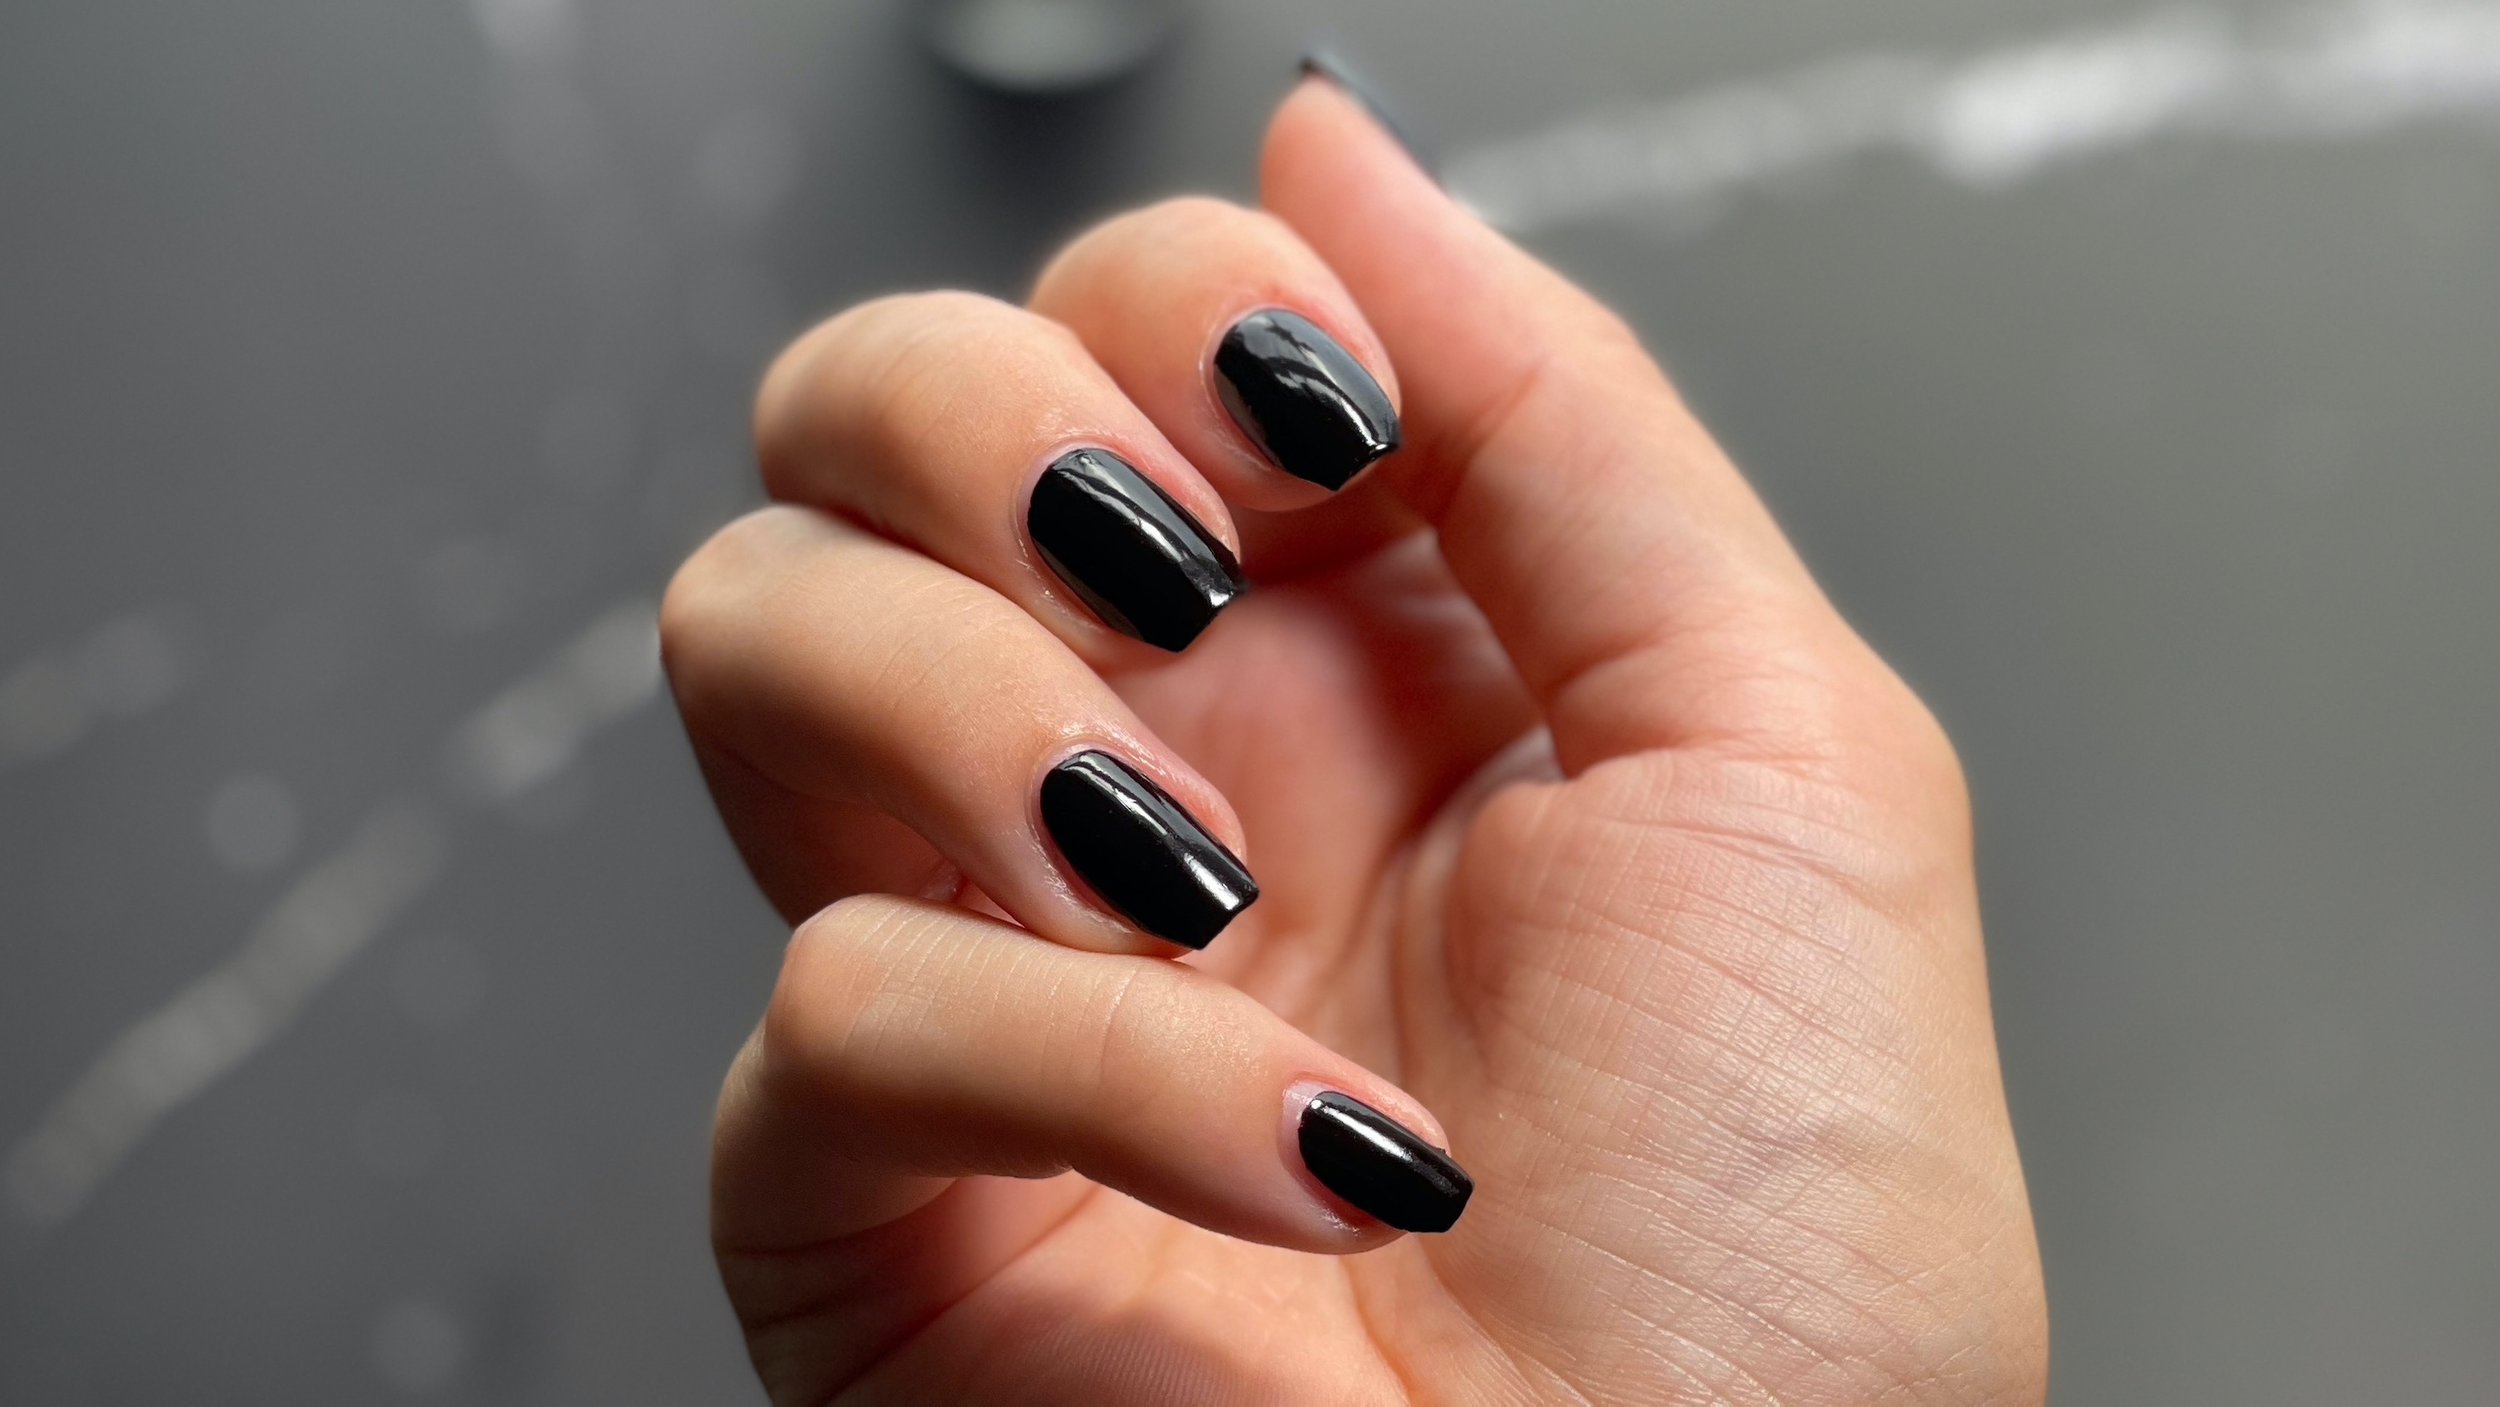 1. OPI Nail Lacquer in "Lincoln Park After Dark" - wide 3